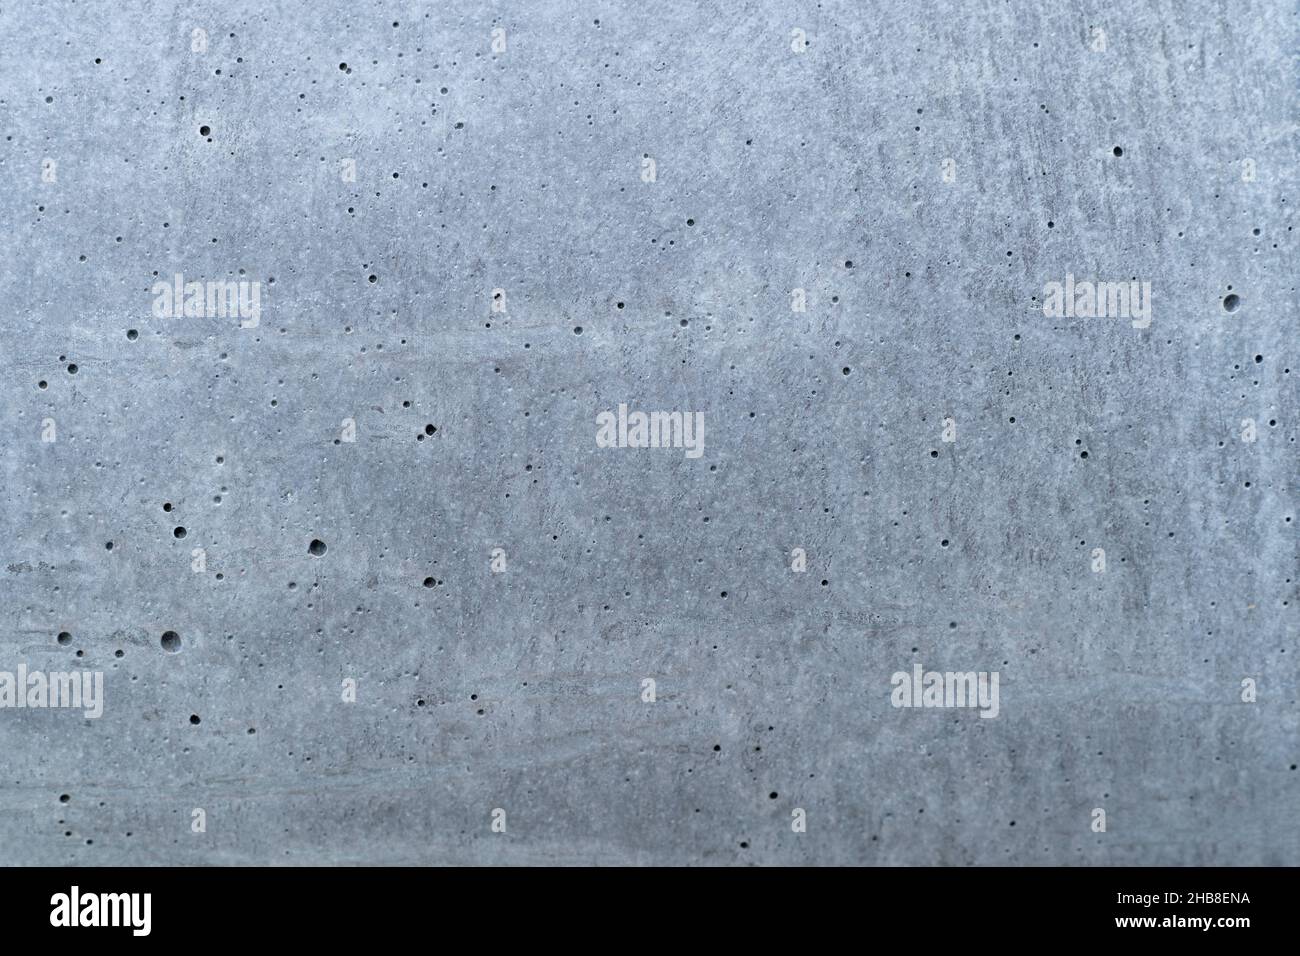 beton texture background. Seamless concrete brut grunge wall or floor  Weathered cement with pores for modern interior design Stock Photo